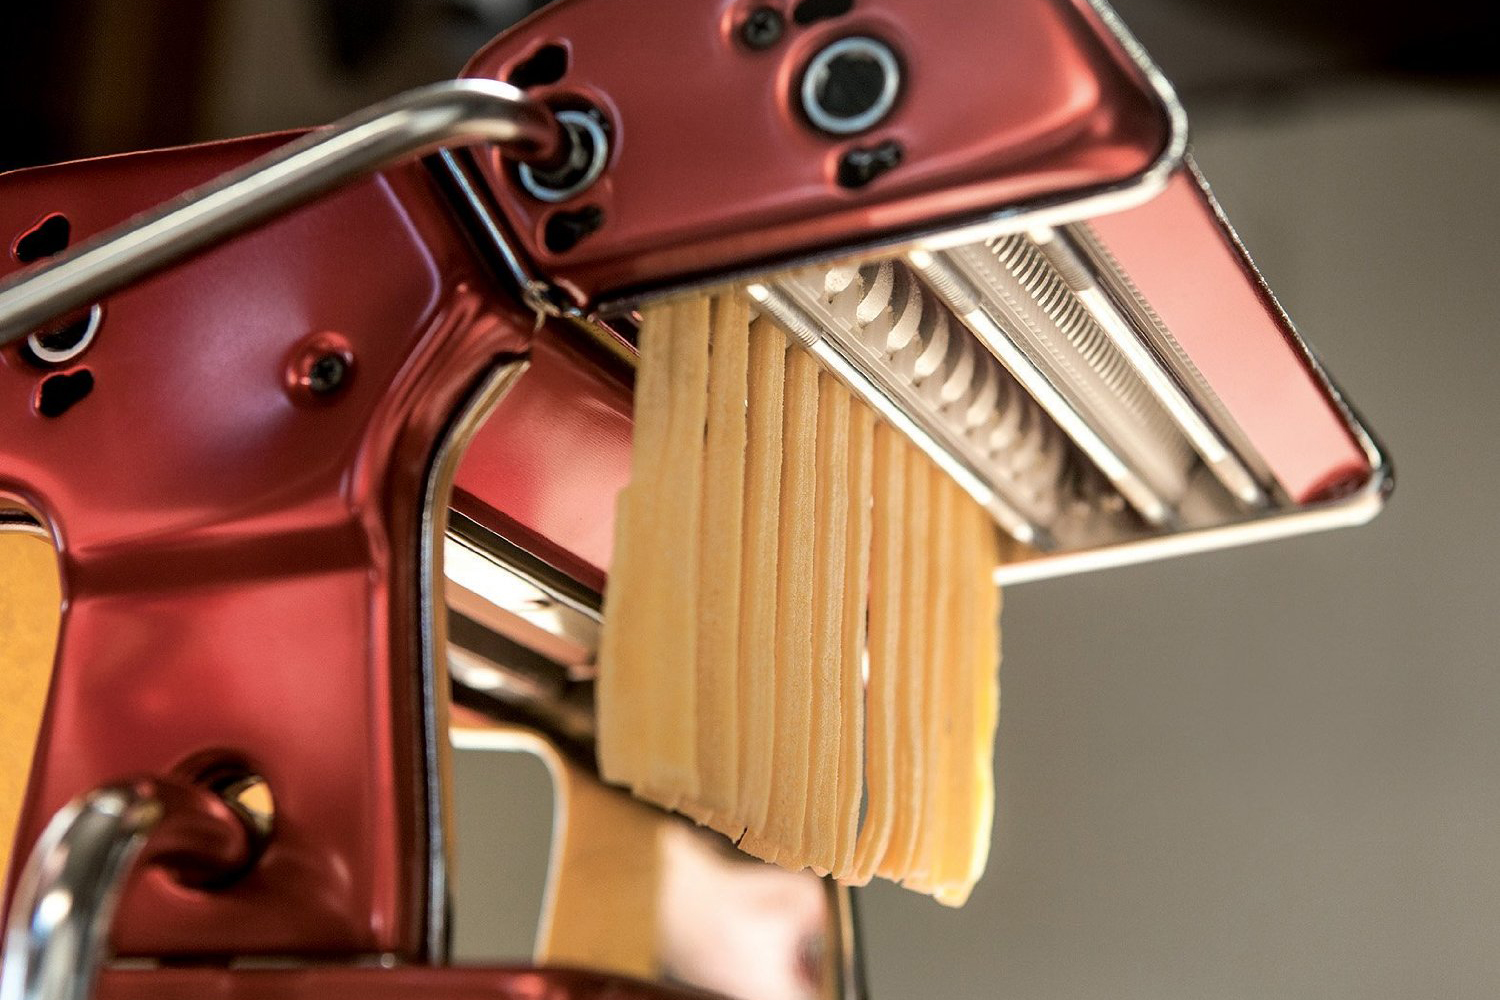 Best Pasta Makers Black Friday Deals, Sales and Ads